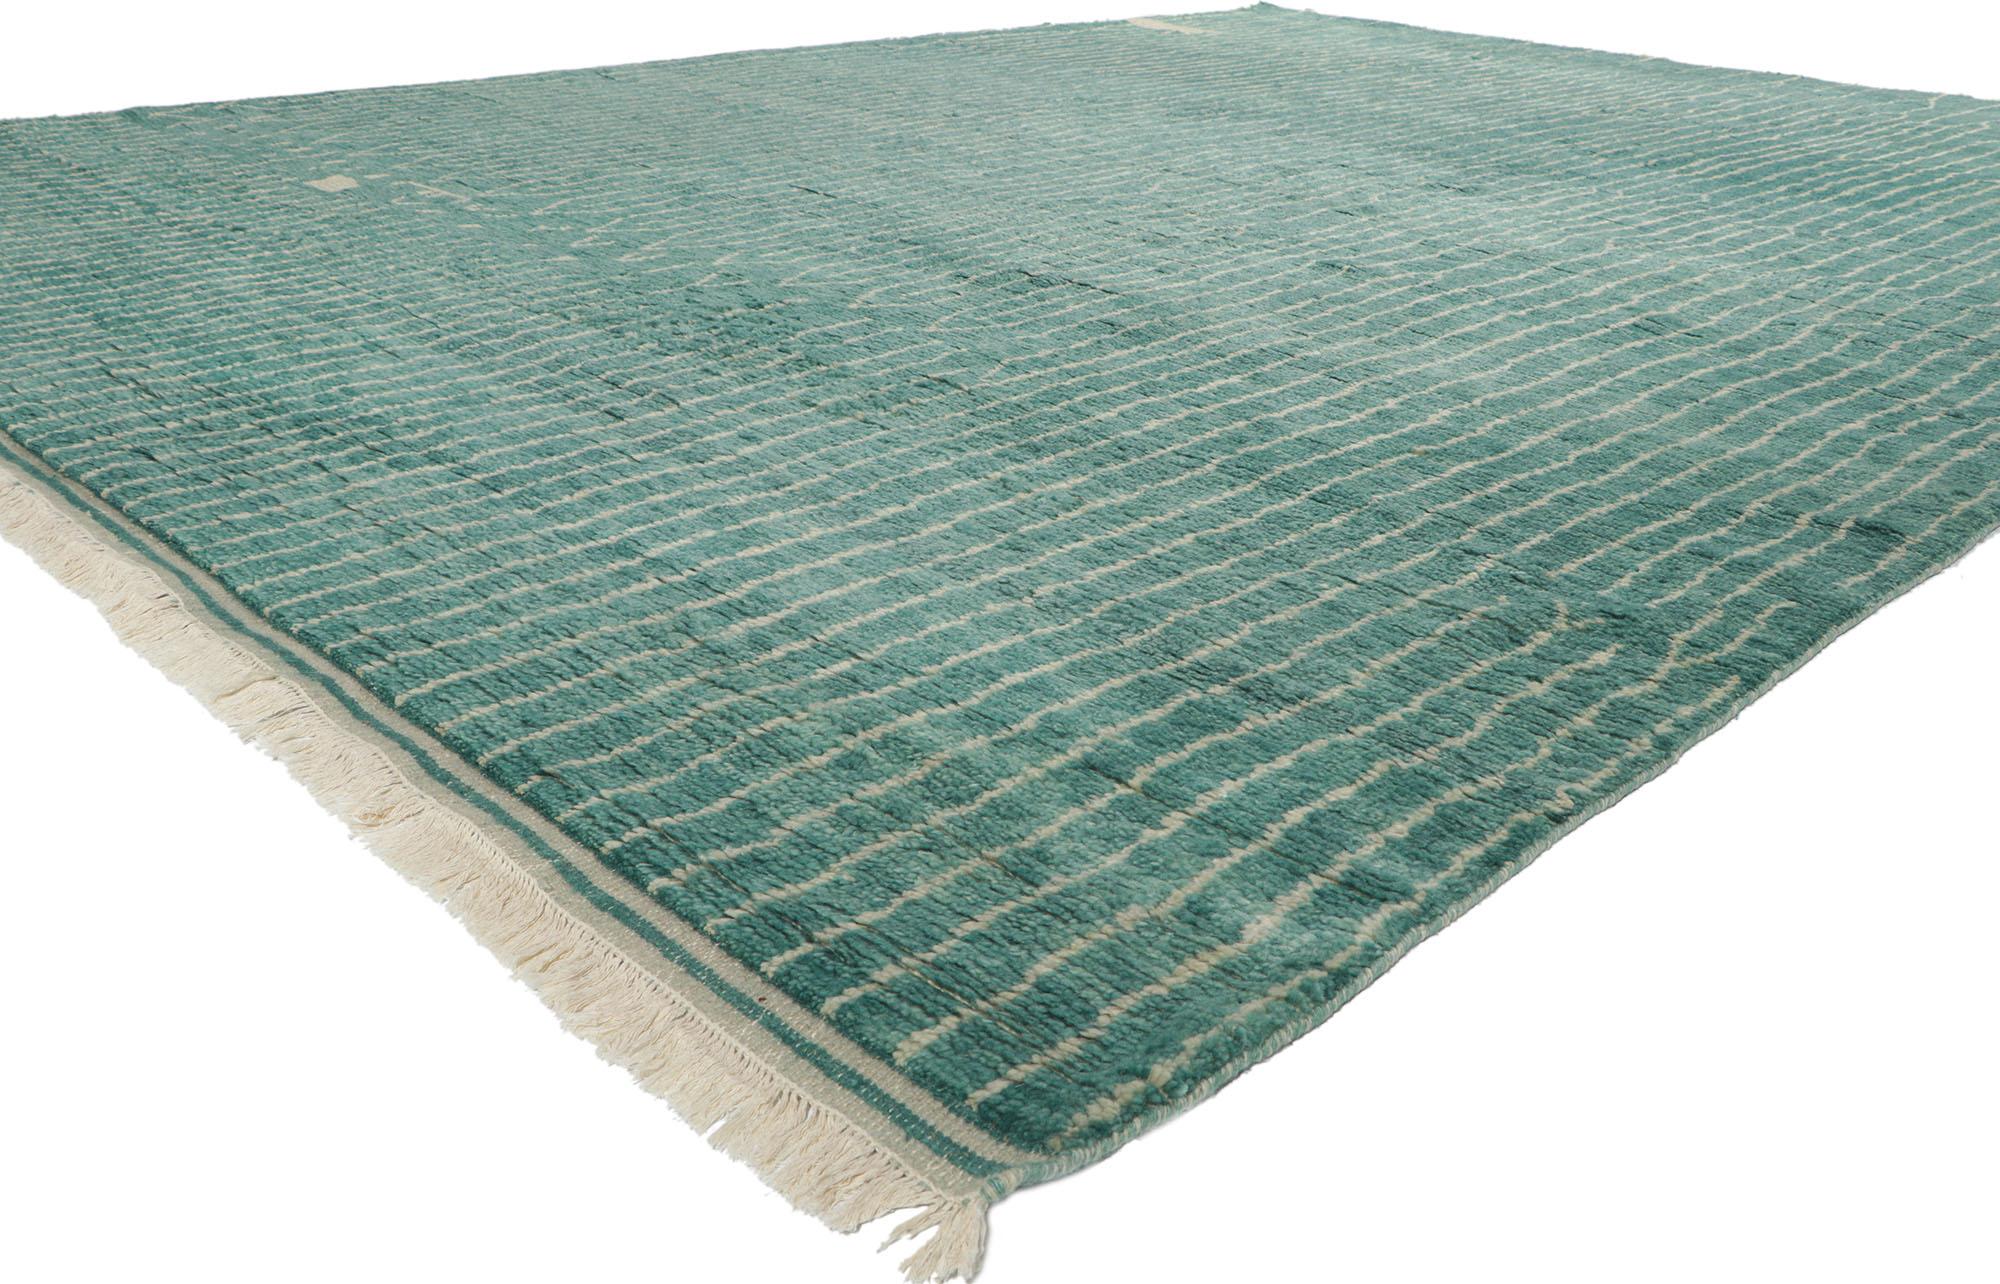 30772 New Contemporary Moroccan Style Rug 10'03 x 13'08. Channeling a coastal cottage with colors reminiscence of sea glass and weathered wood, this hand-knotted wool contemporary Moroccan style rug is a captivating vision of woven beauty. The